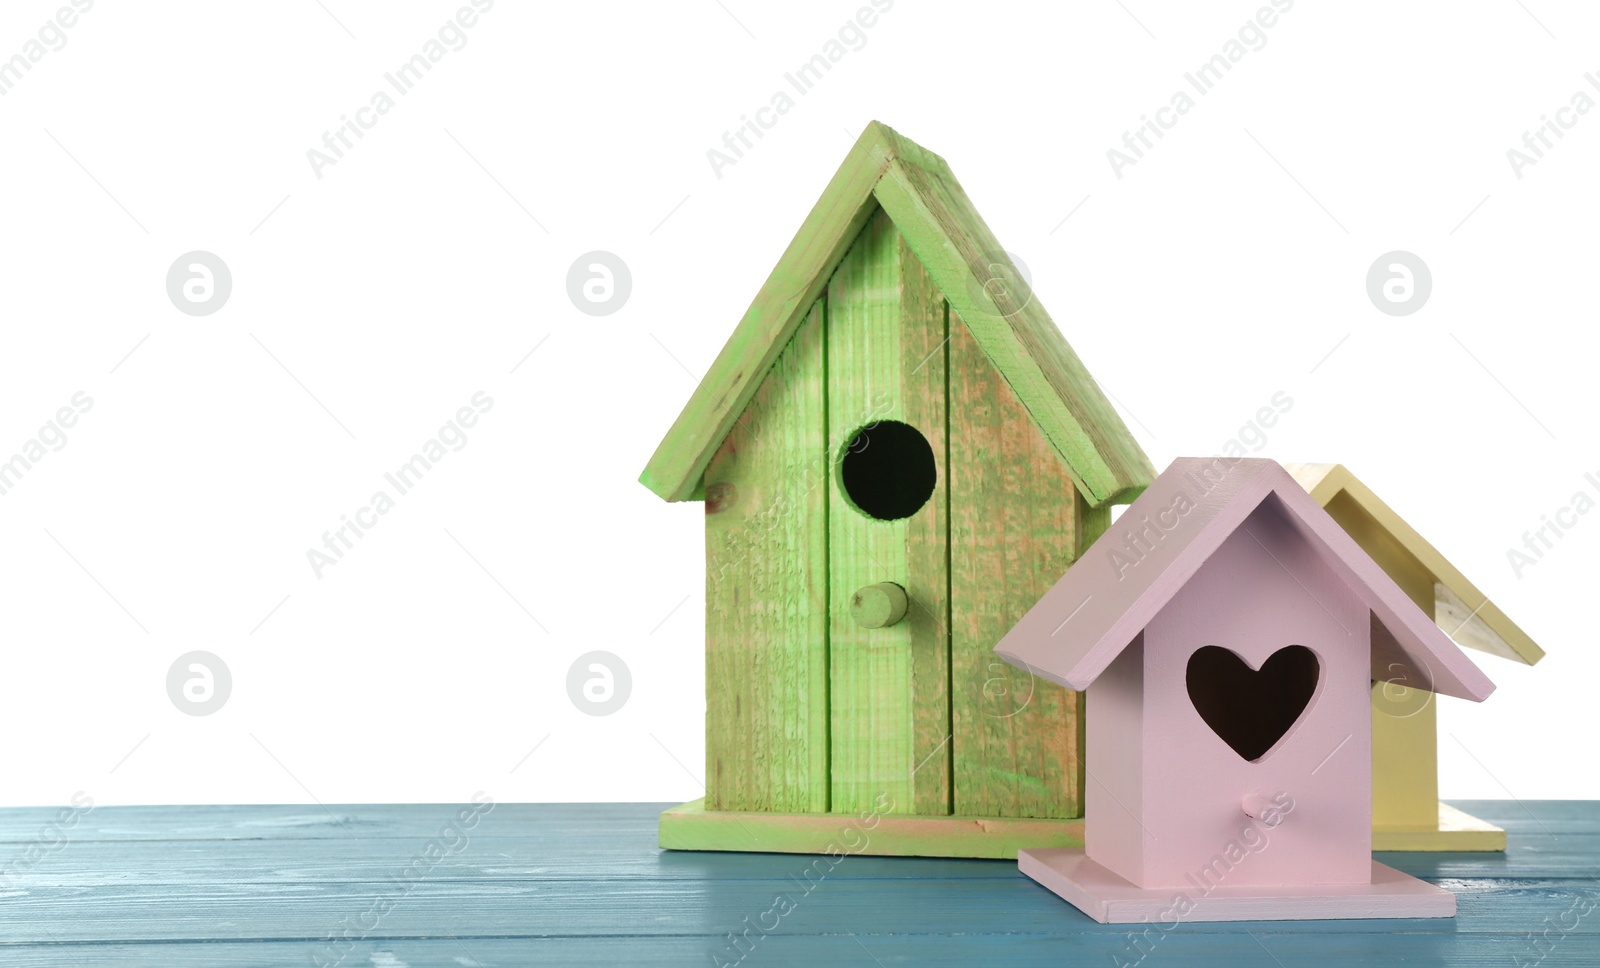 Photo of Three different bird houses on light blue wooden table against white background